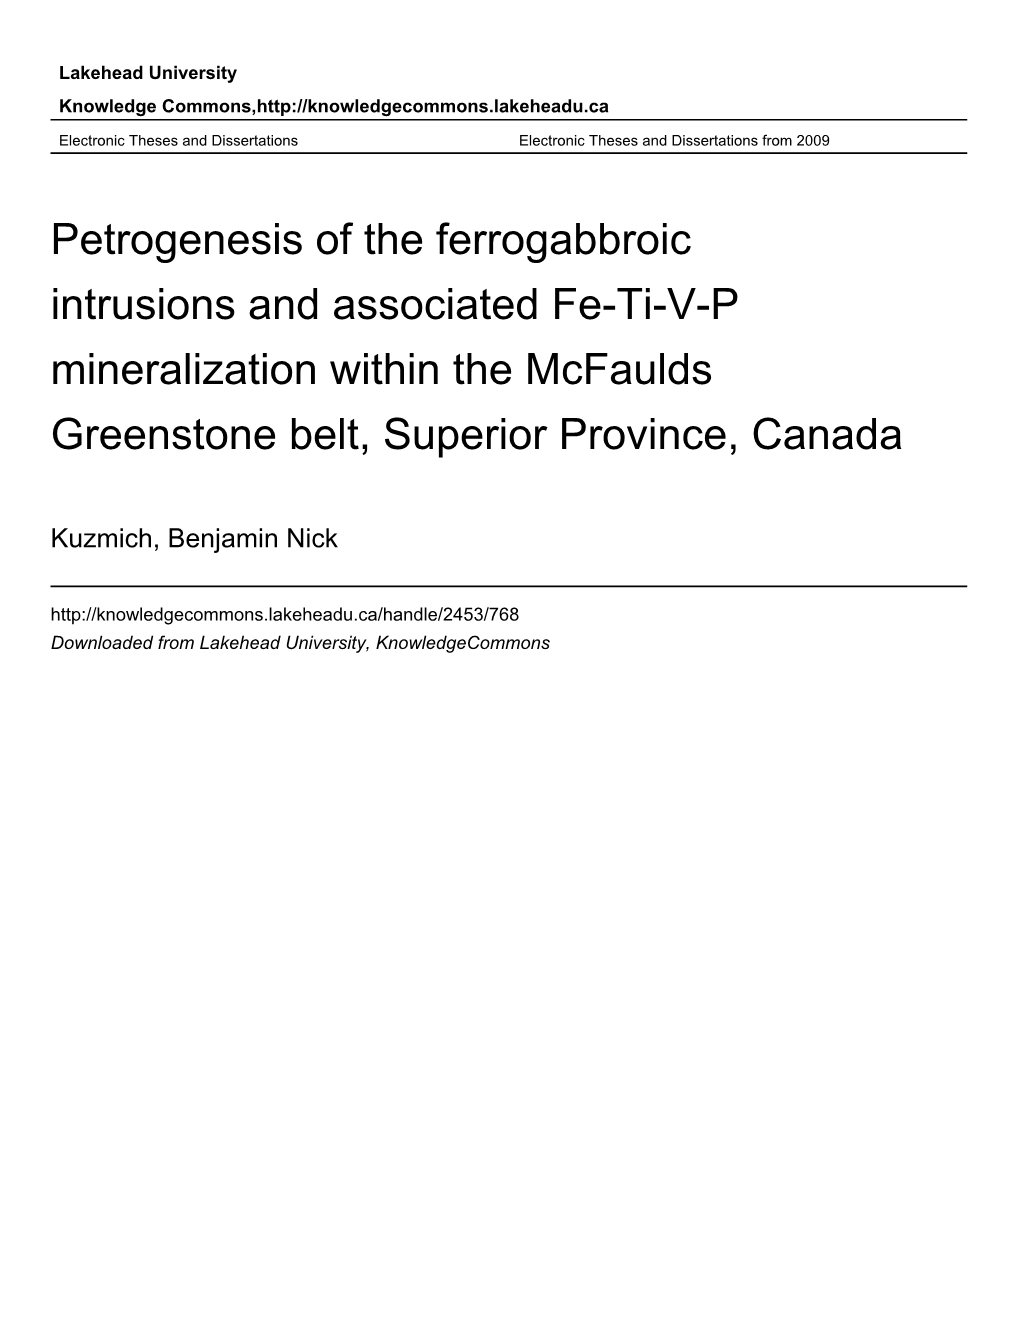 Petrogenesis of the Ferrogabbroic Intrusions and Associated Fe-Ti-V-P Mineralization Within the Mcfaulds Greenstone Belt, Superior Province, Canada